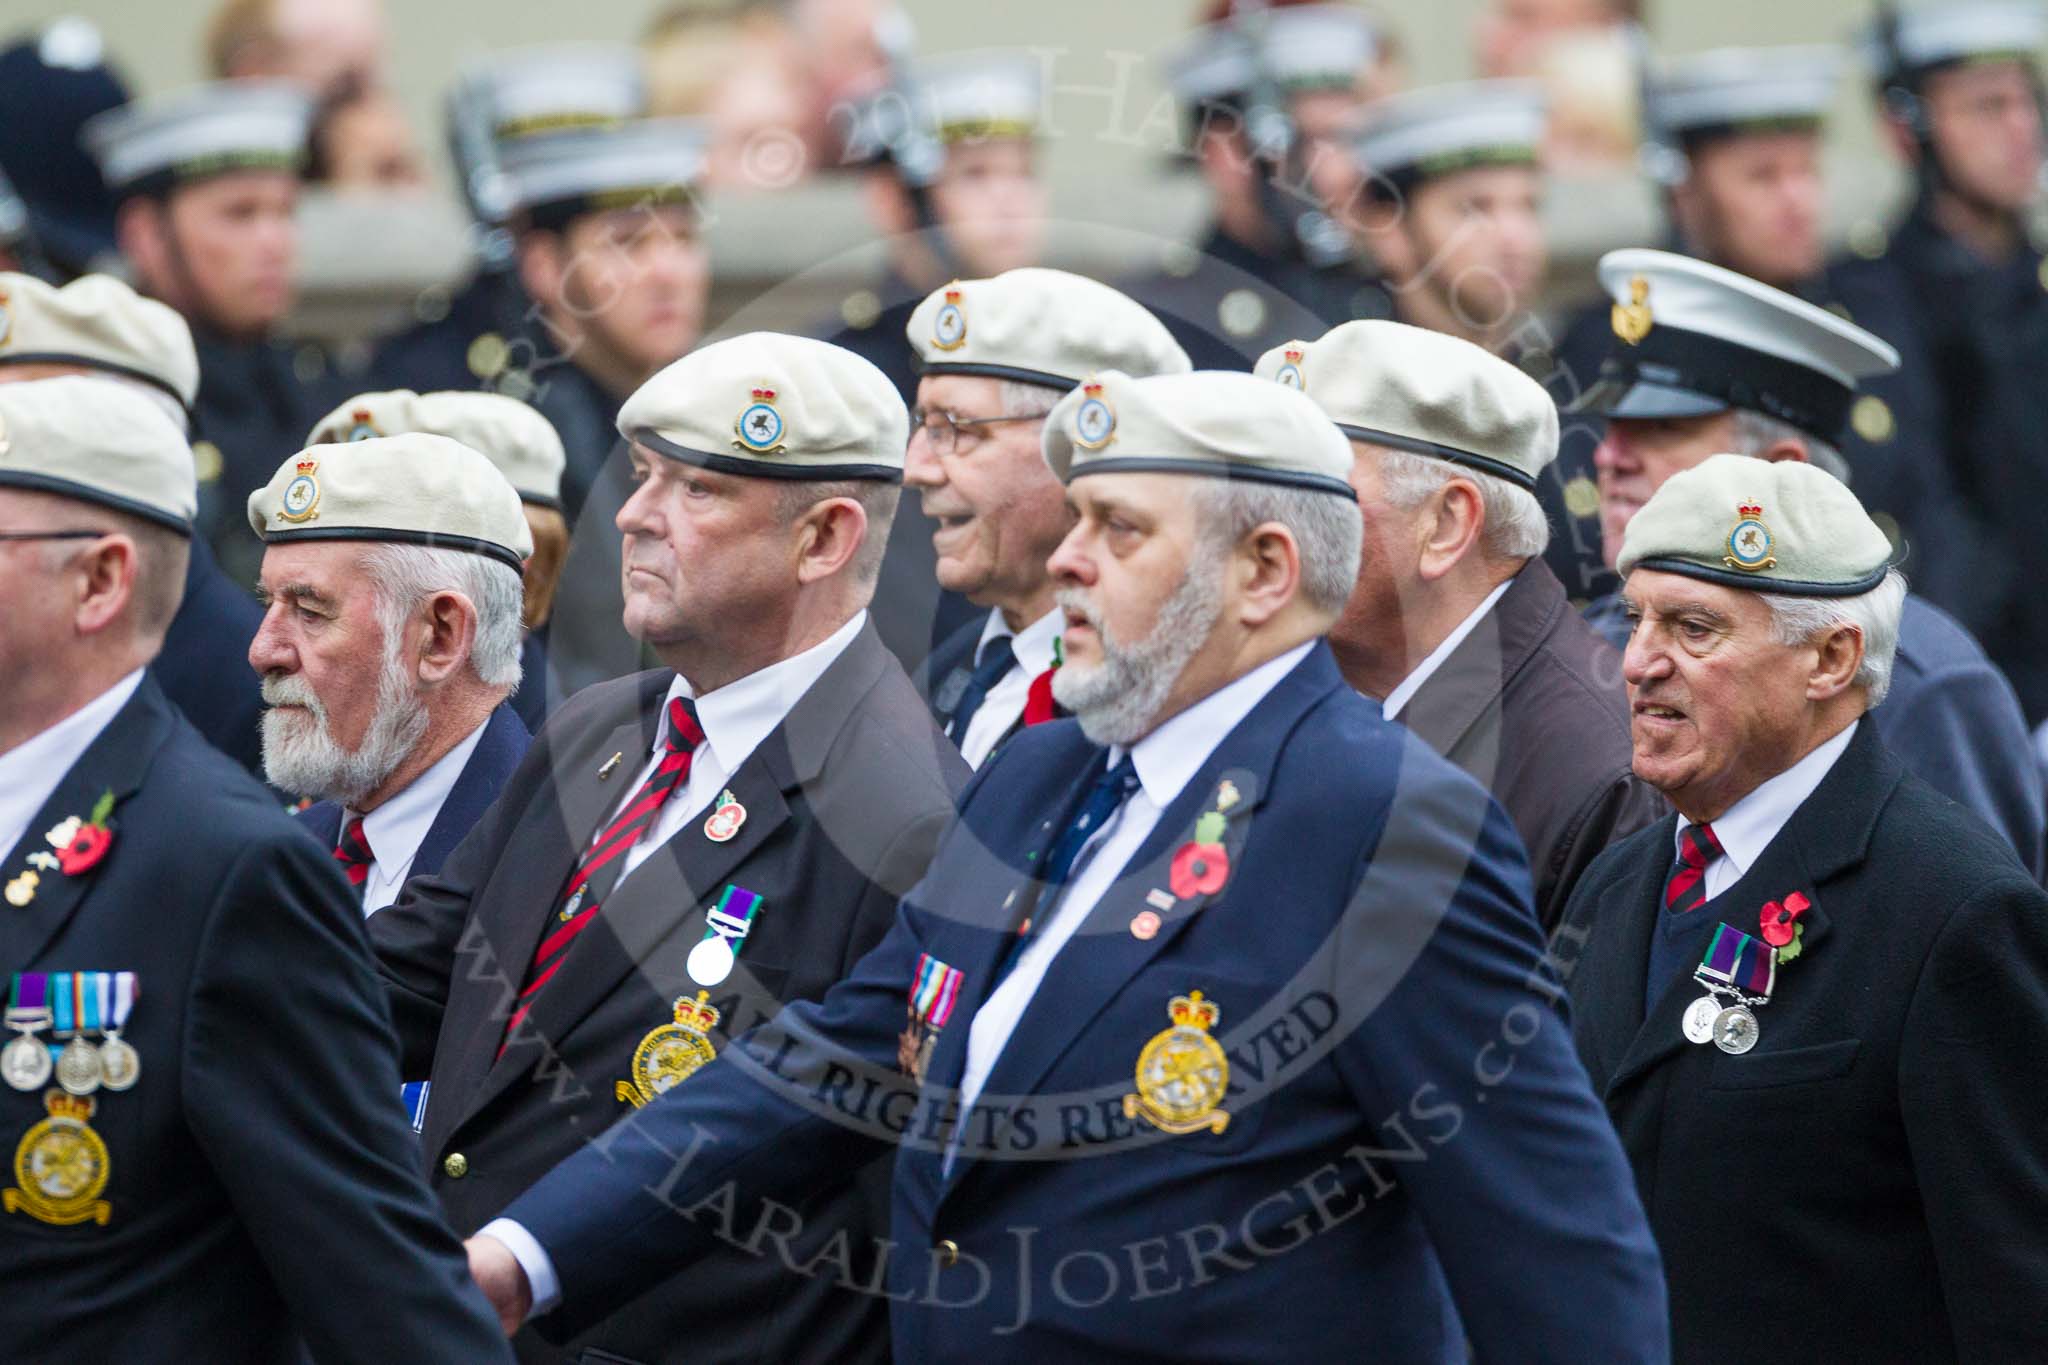 Remembrance Sunday at the Cenotaph 2015: Group C24, Royal Air Force Police Association.
Cenotaph, Whitehall, London SW1,
London,
Greater London,
United Kingdom,
on 08 November 2015 at 11:50, image #568